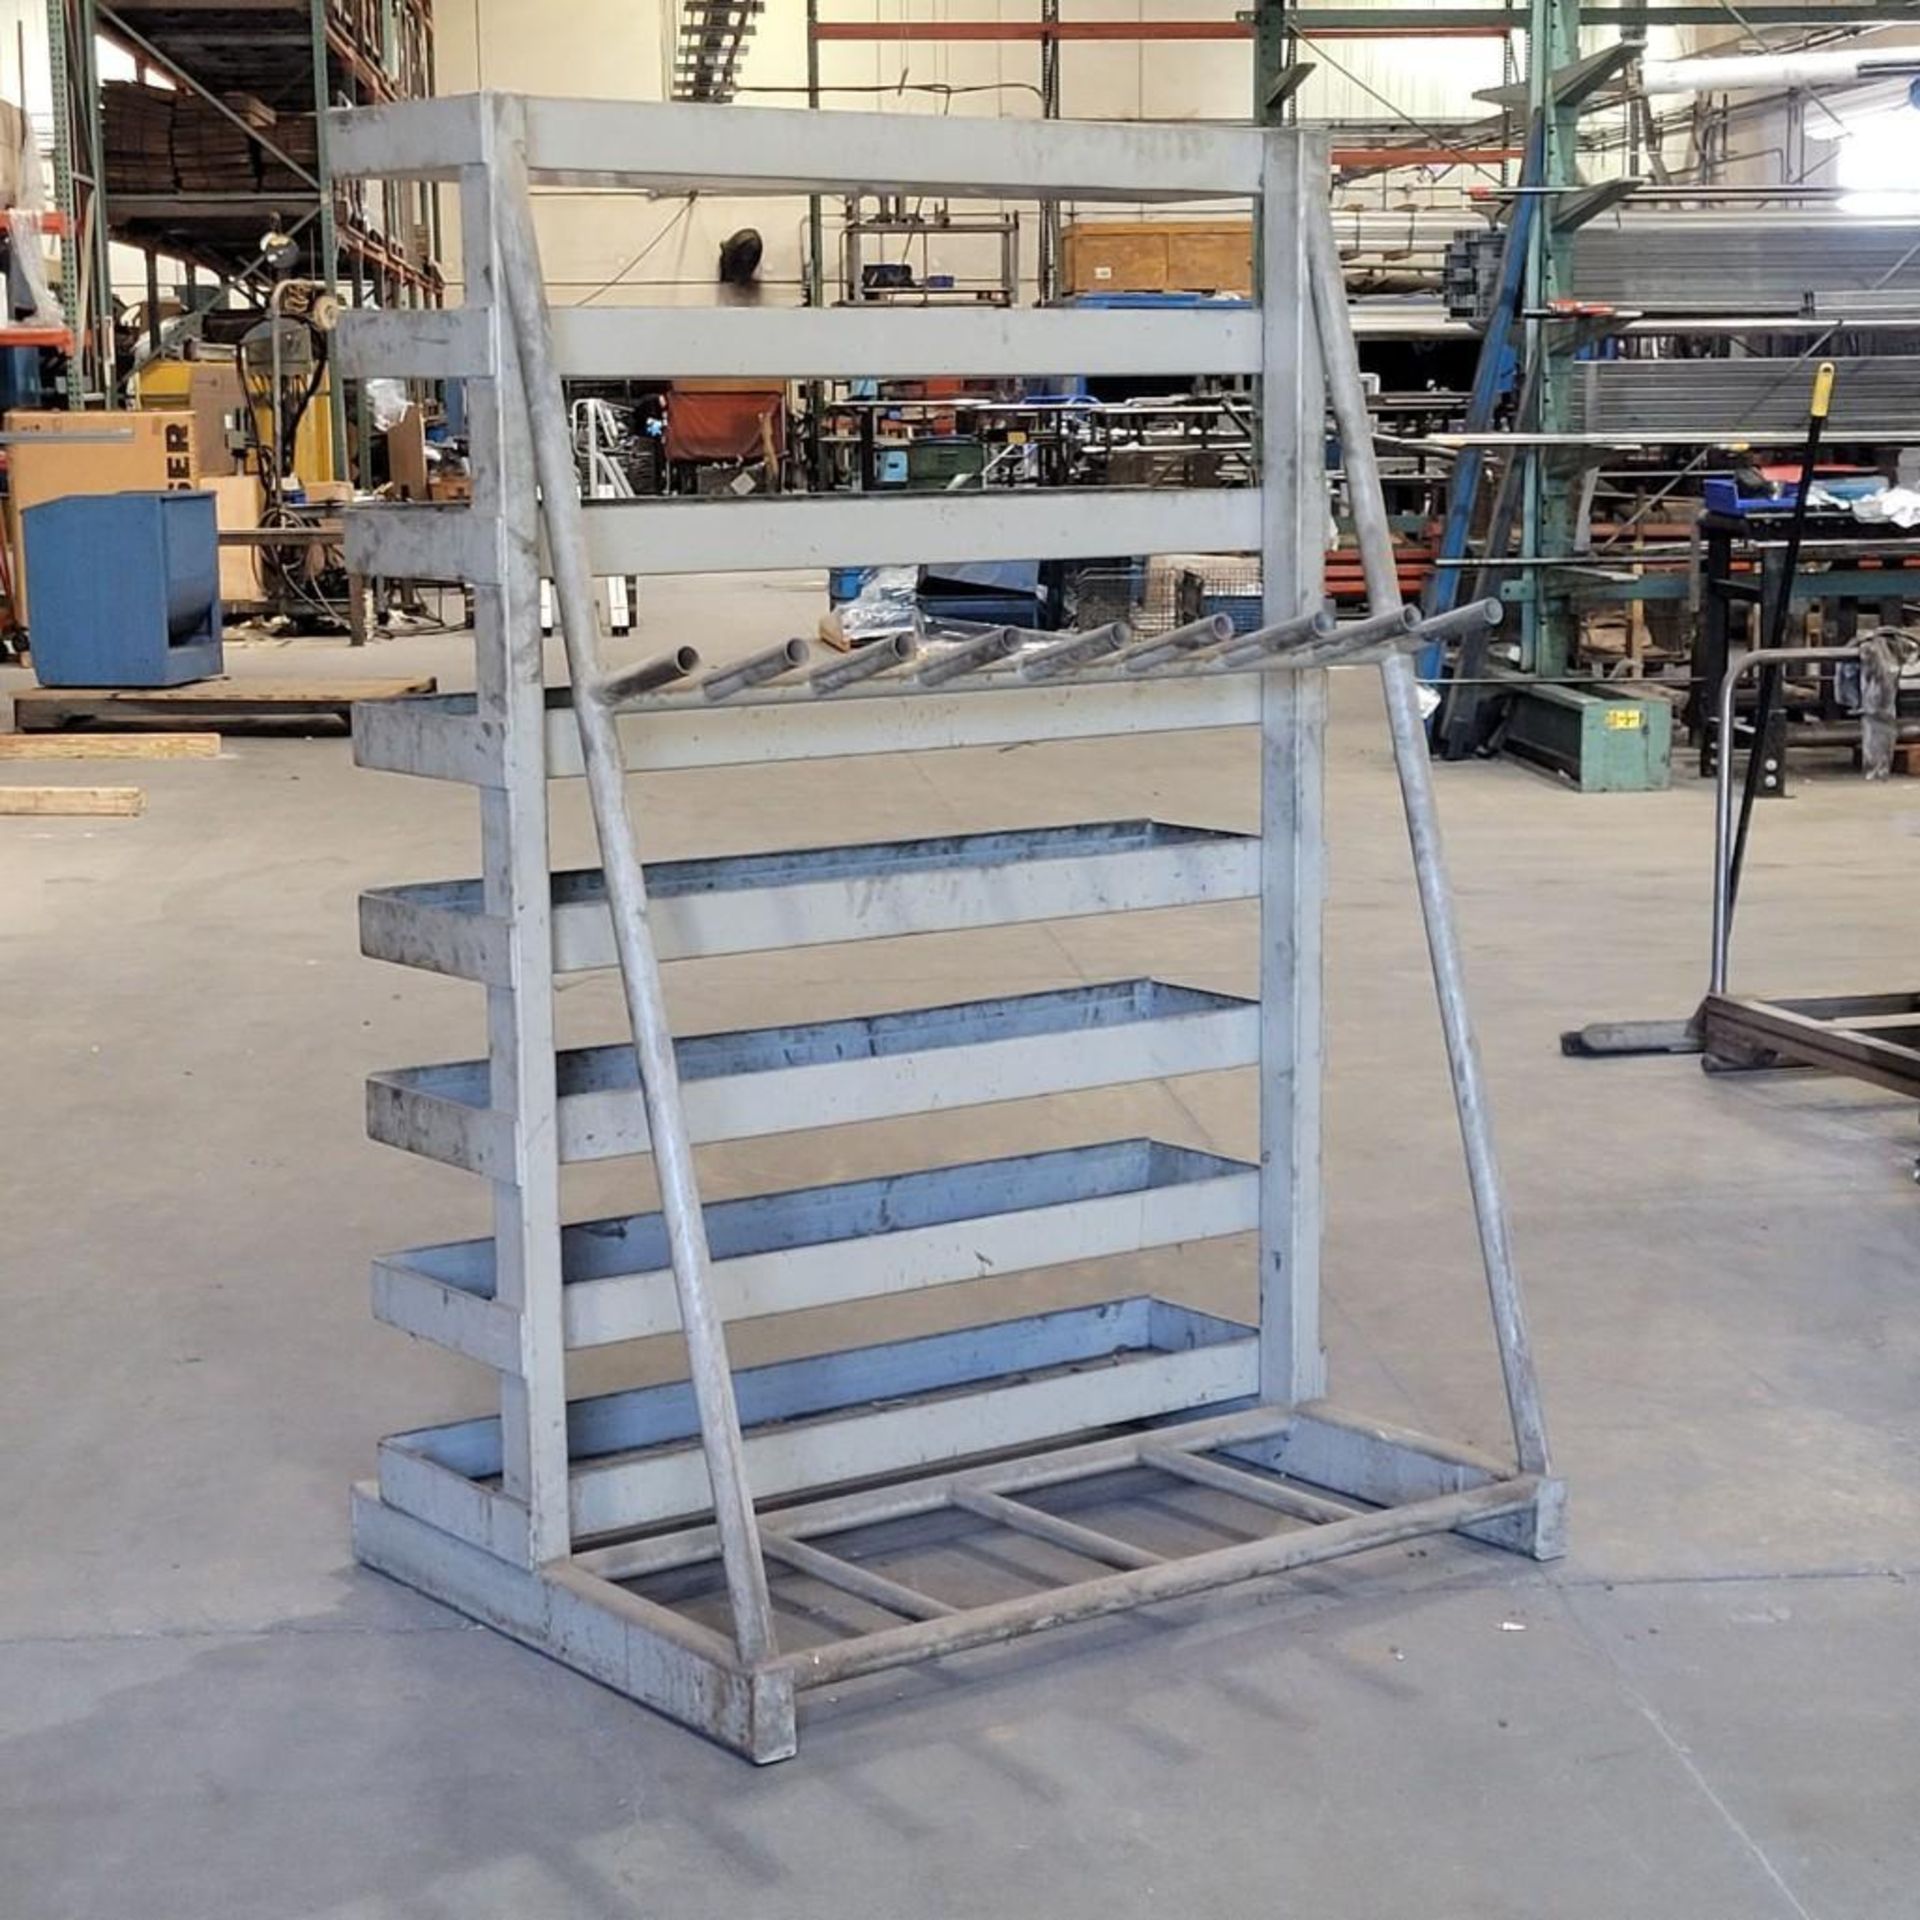 8 Tray Remnant Rack with Tube Storage - Image 2 of 3